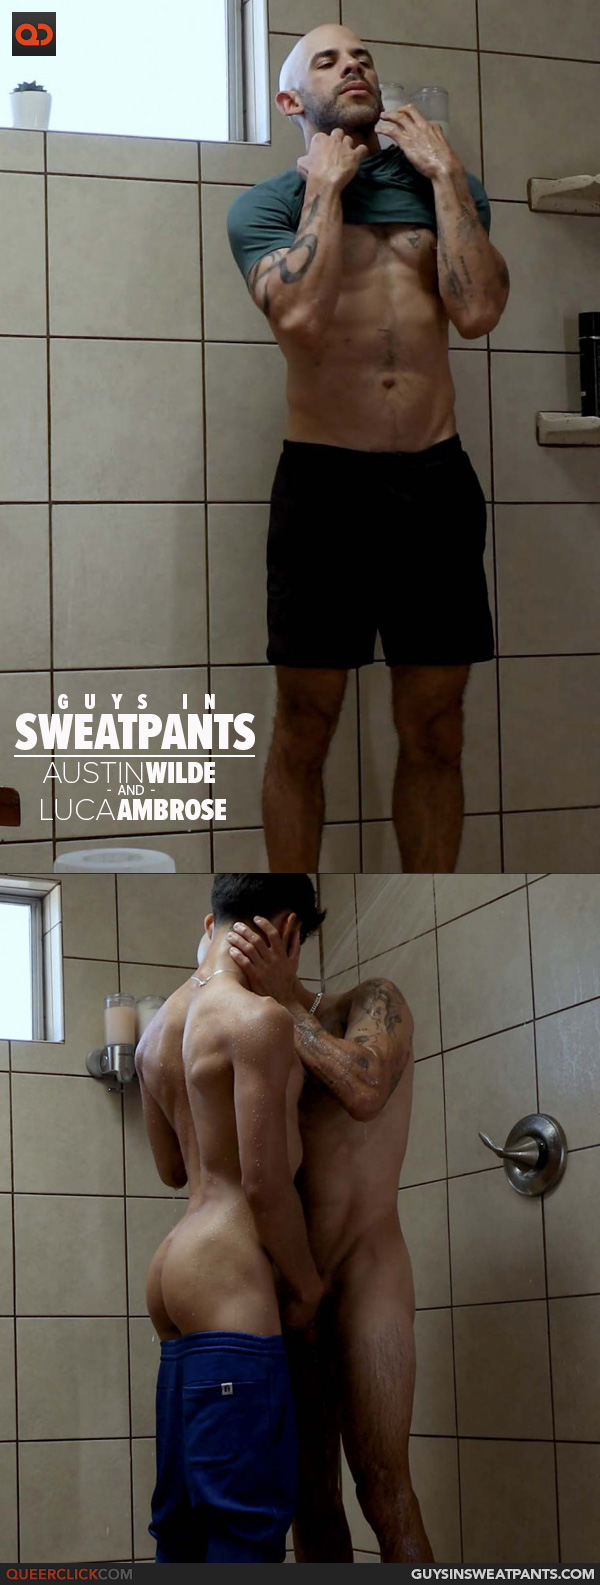 Guys in Sweatpants: Austin Wilde and Luca Ambrose